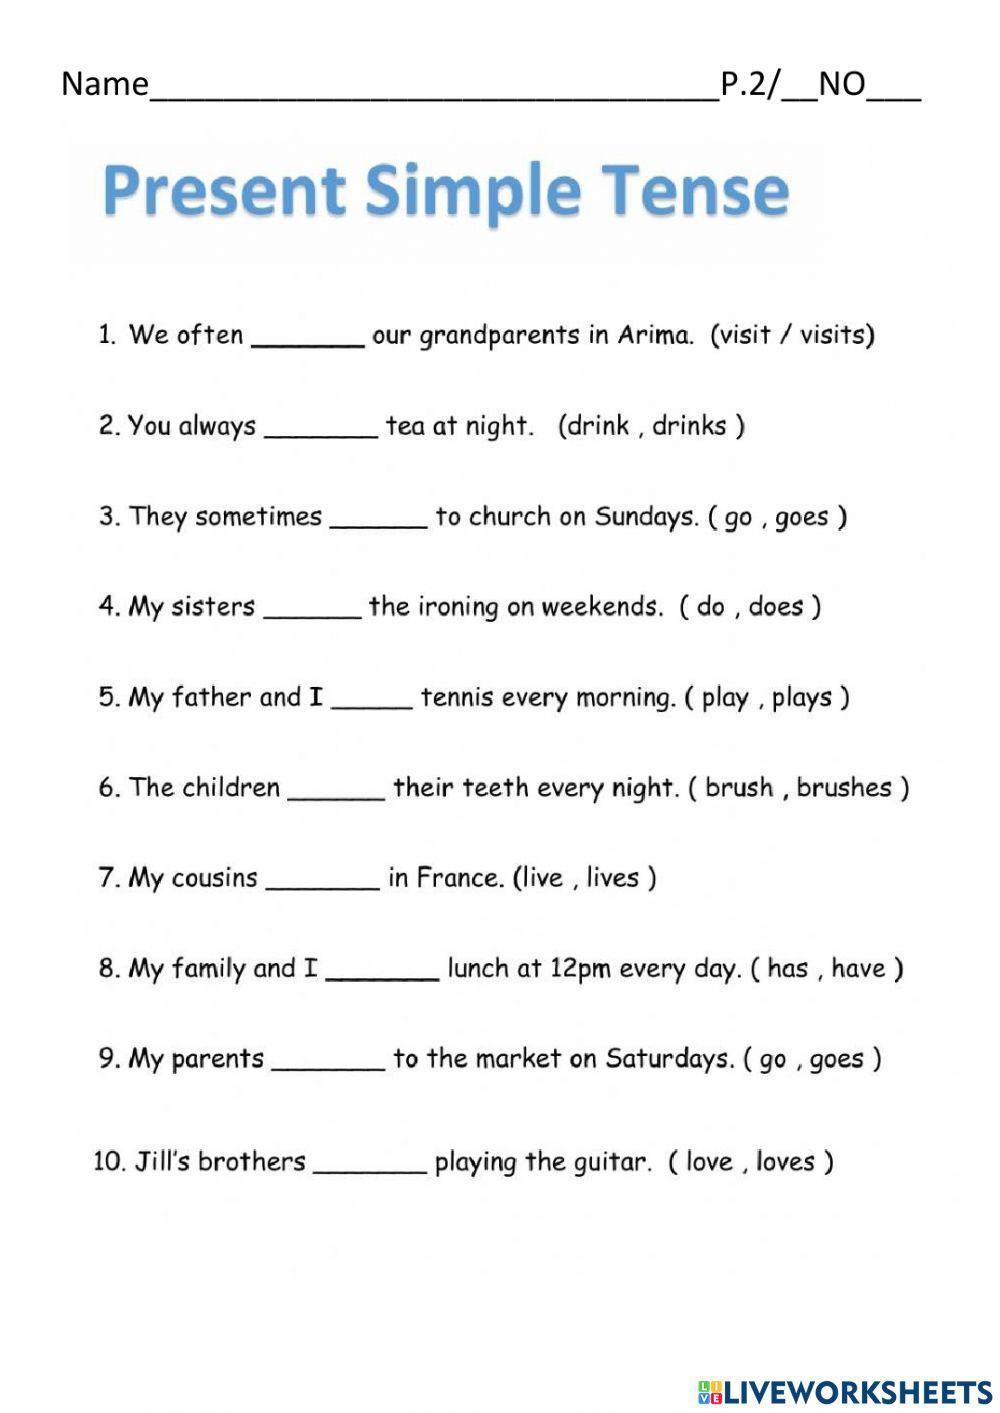 Present Simple Tense Online Exercise For 2 Live Worksheets